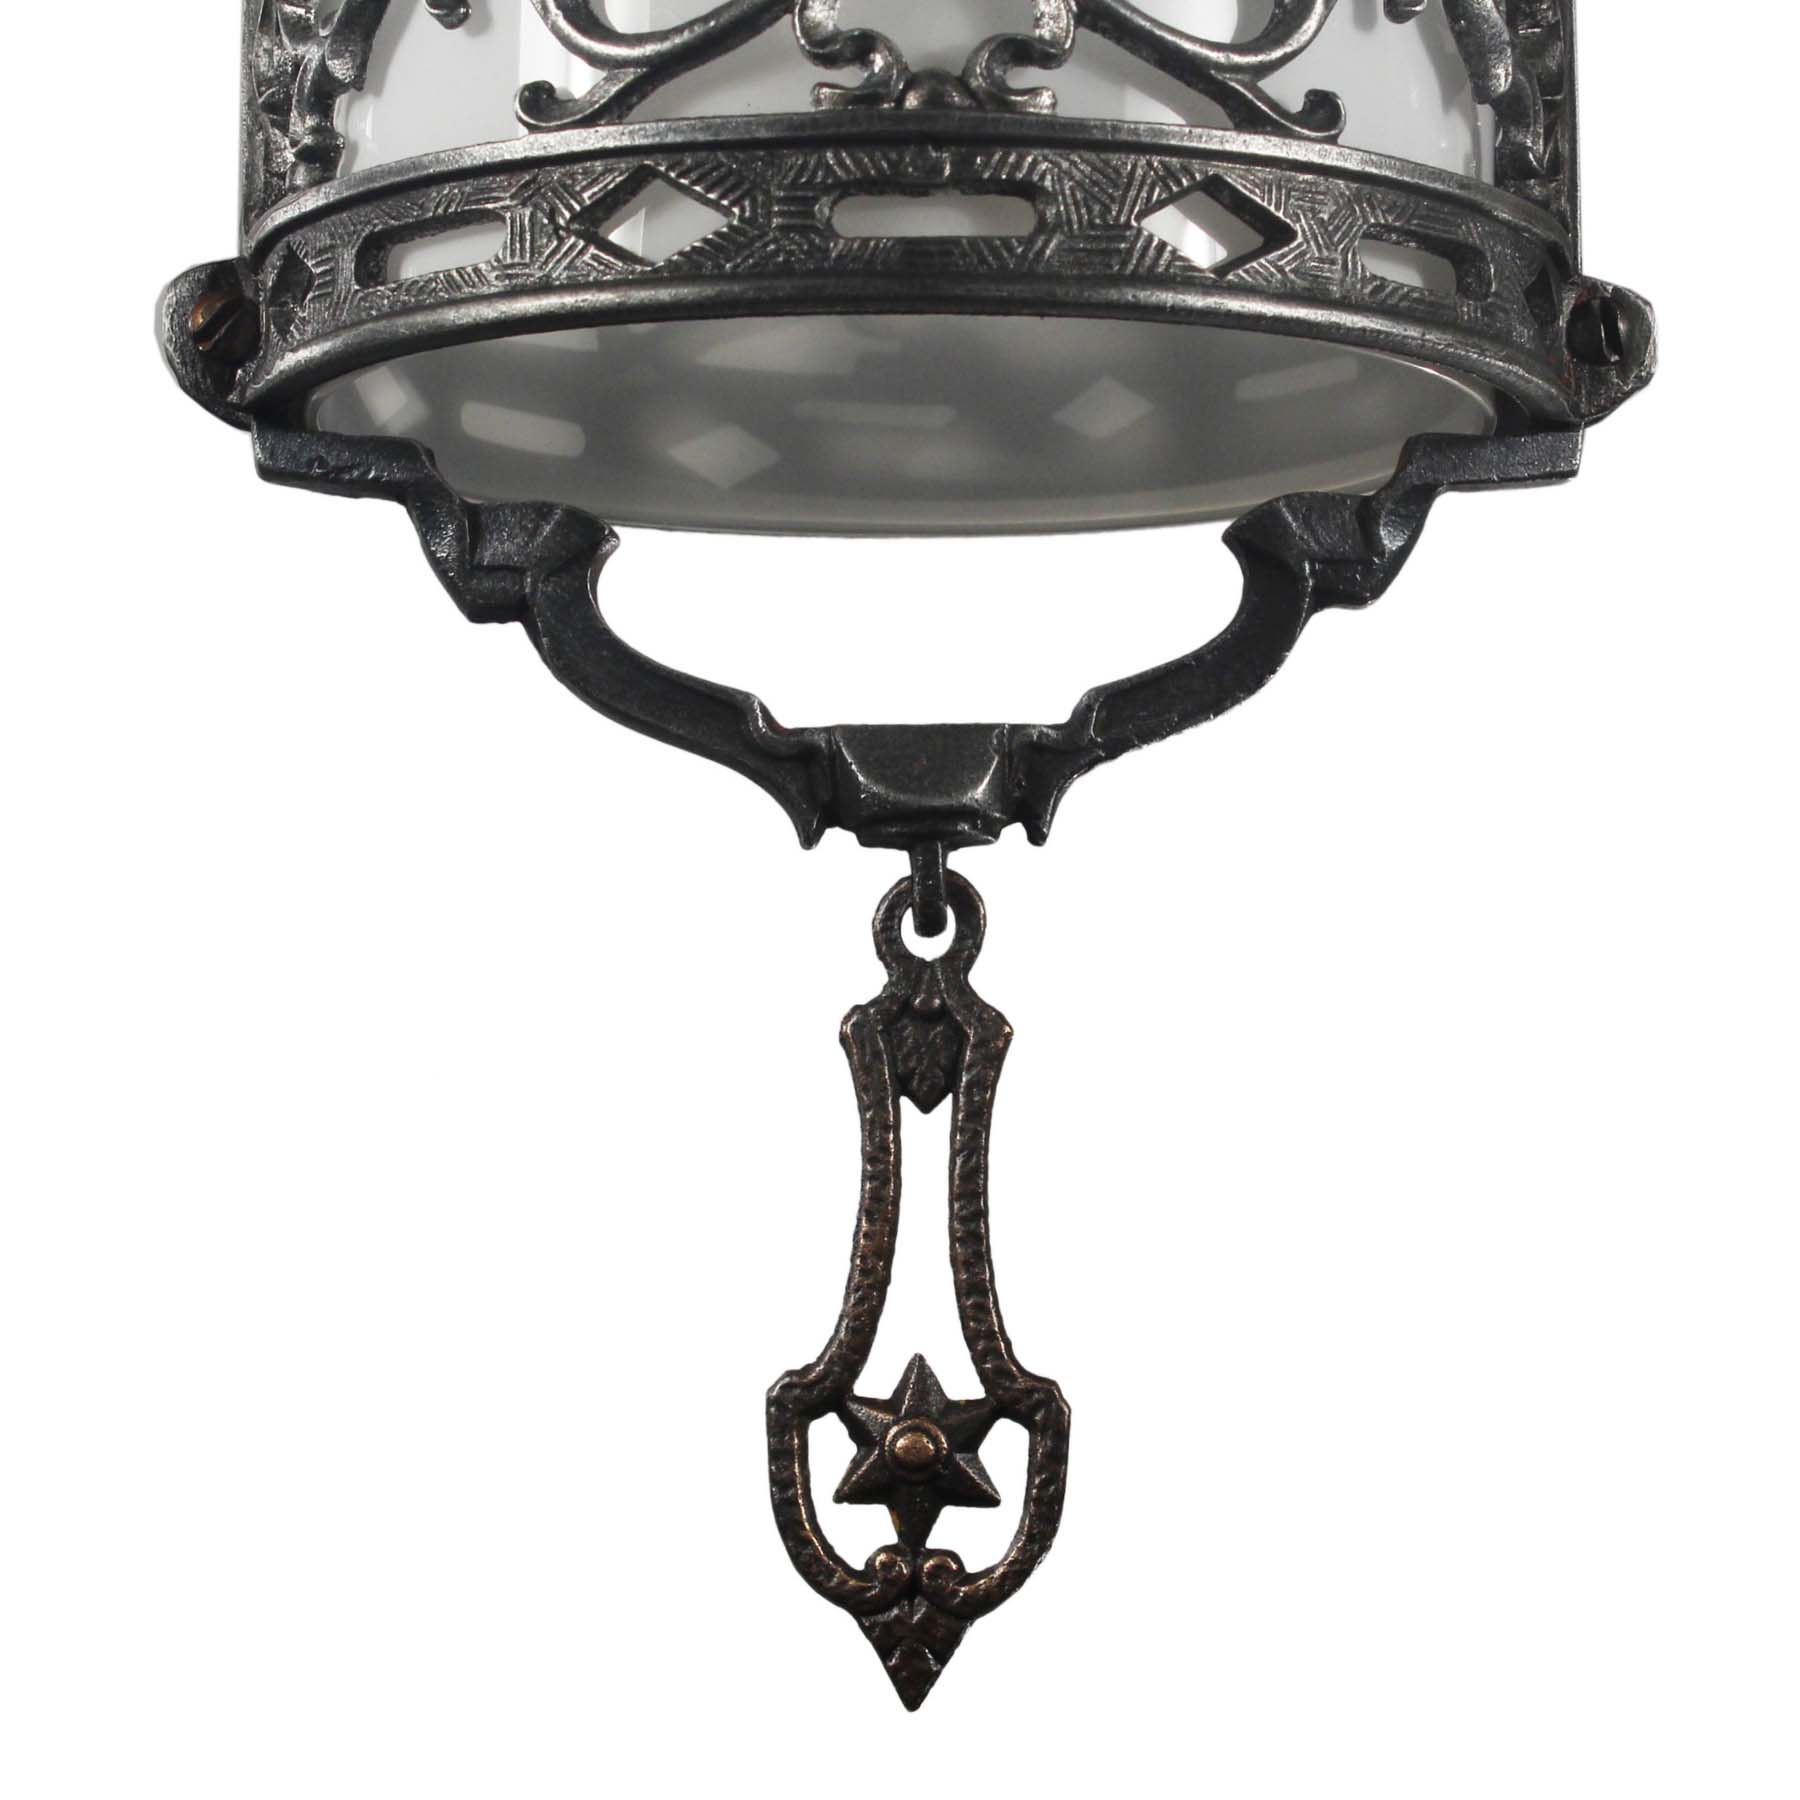 SOLD Unusual Antique Figural Pendant Light with Shields & Dragons-67389